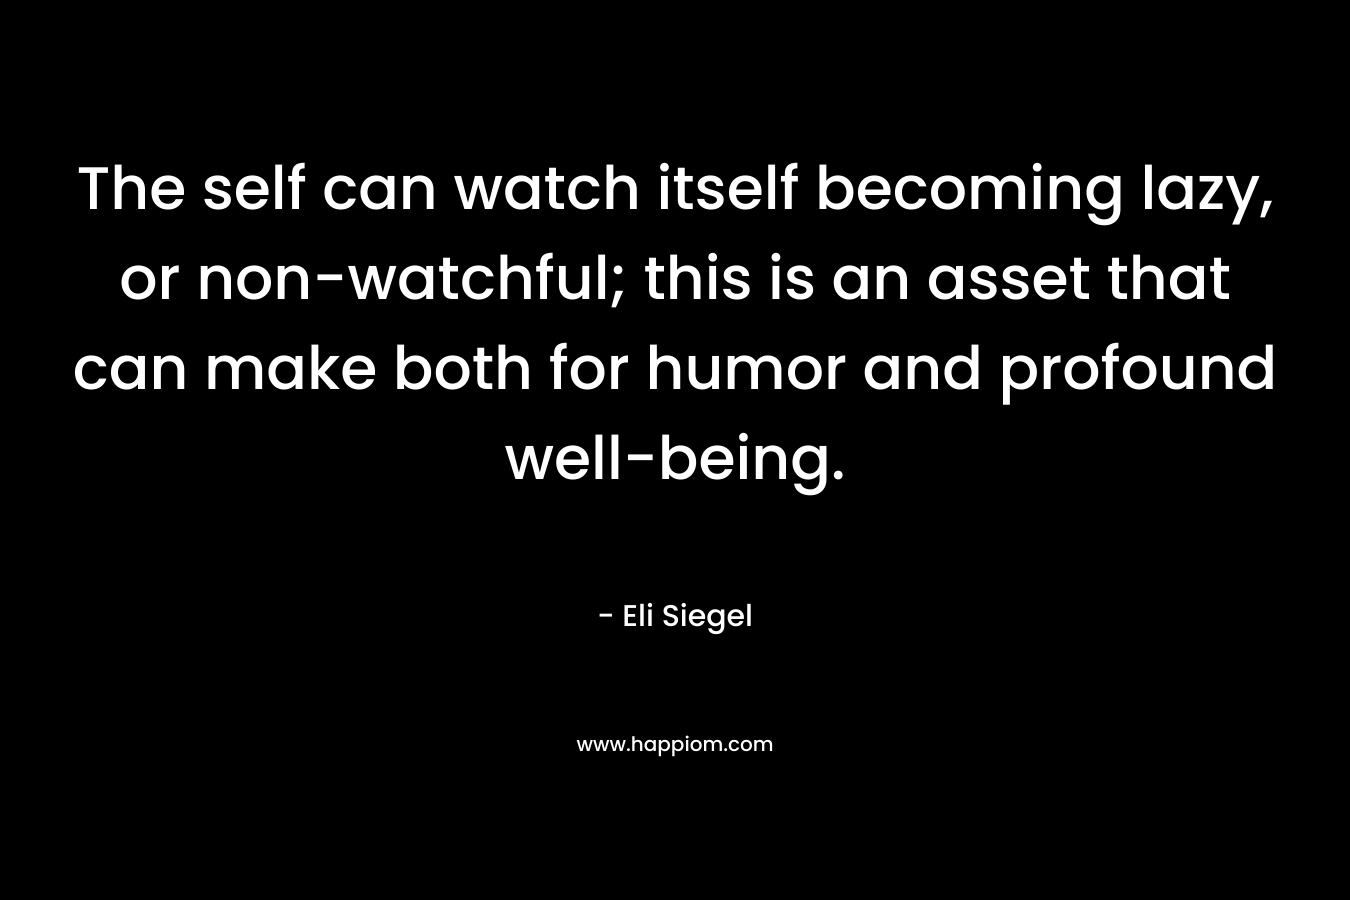 The self can watch itself becoming lazy, or non-watchful; this is an asset that can make both for humor and profound well-being.